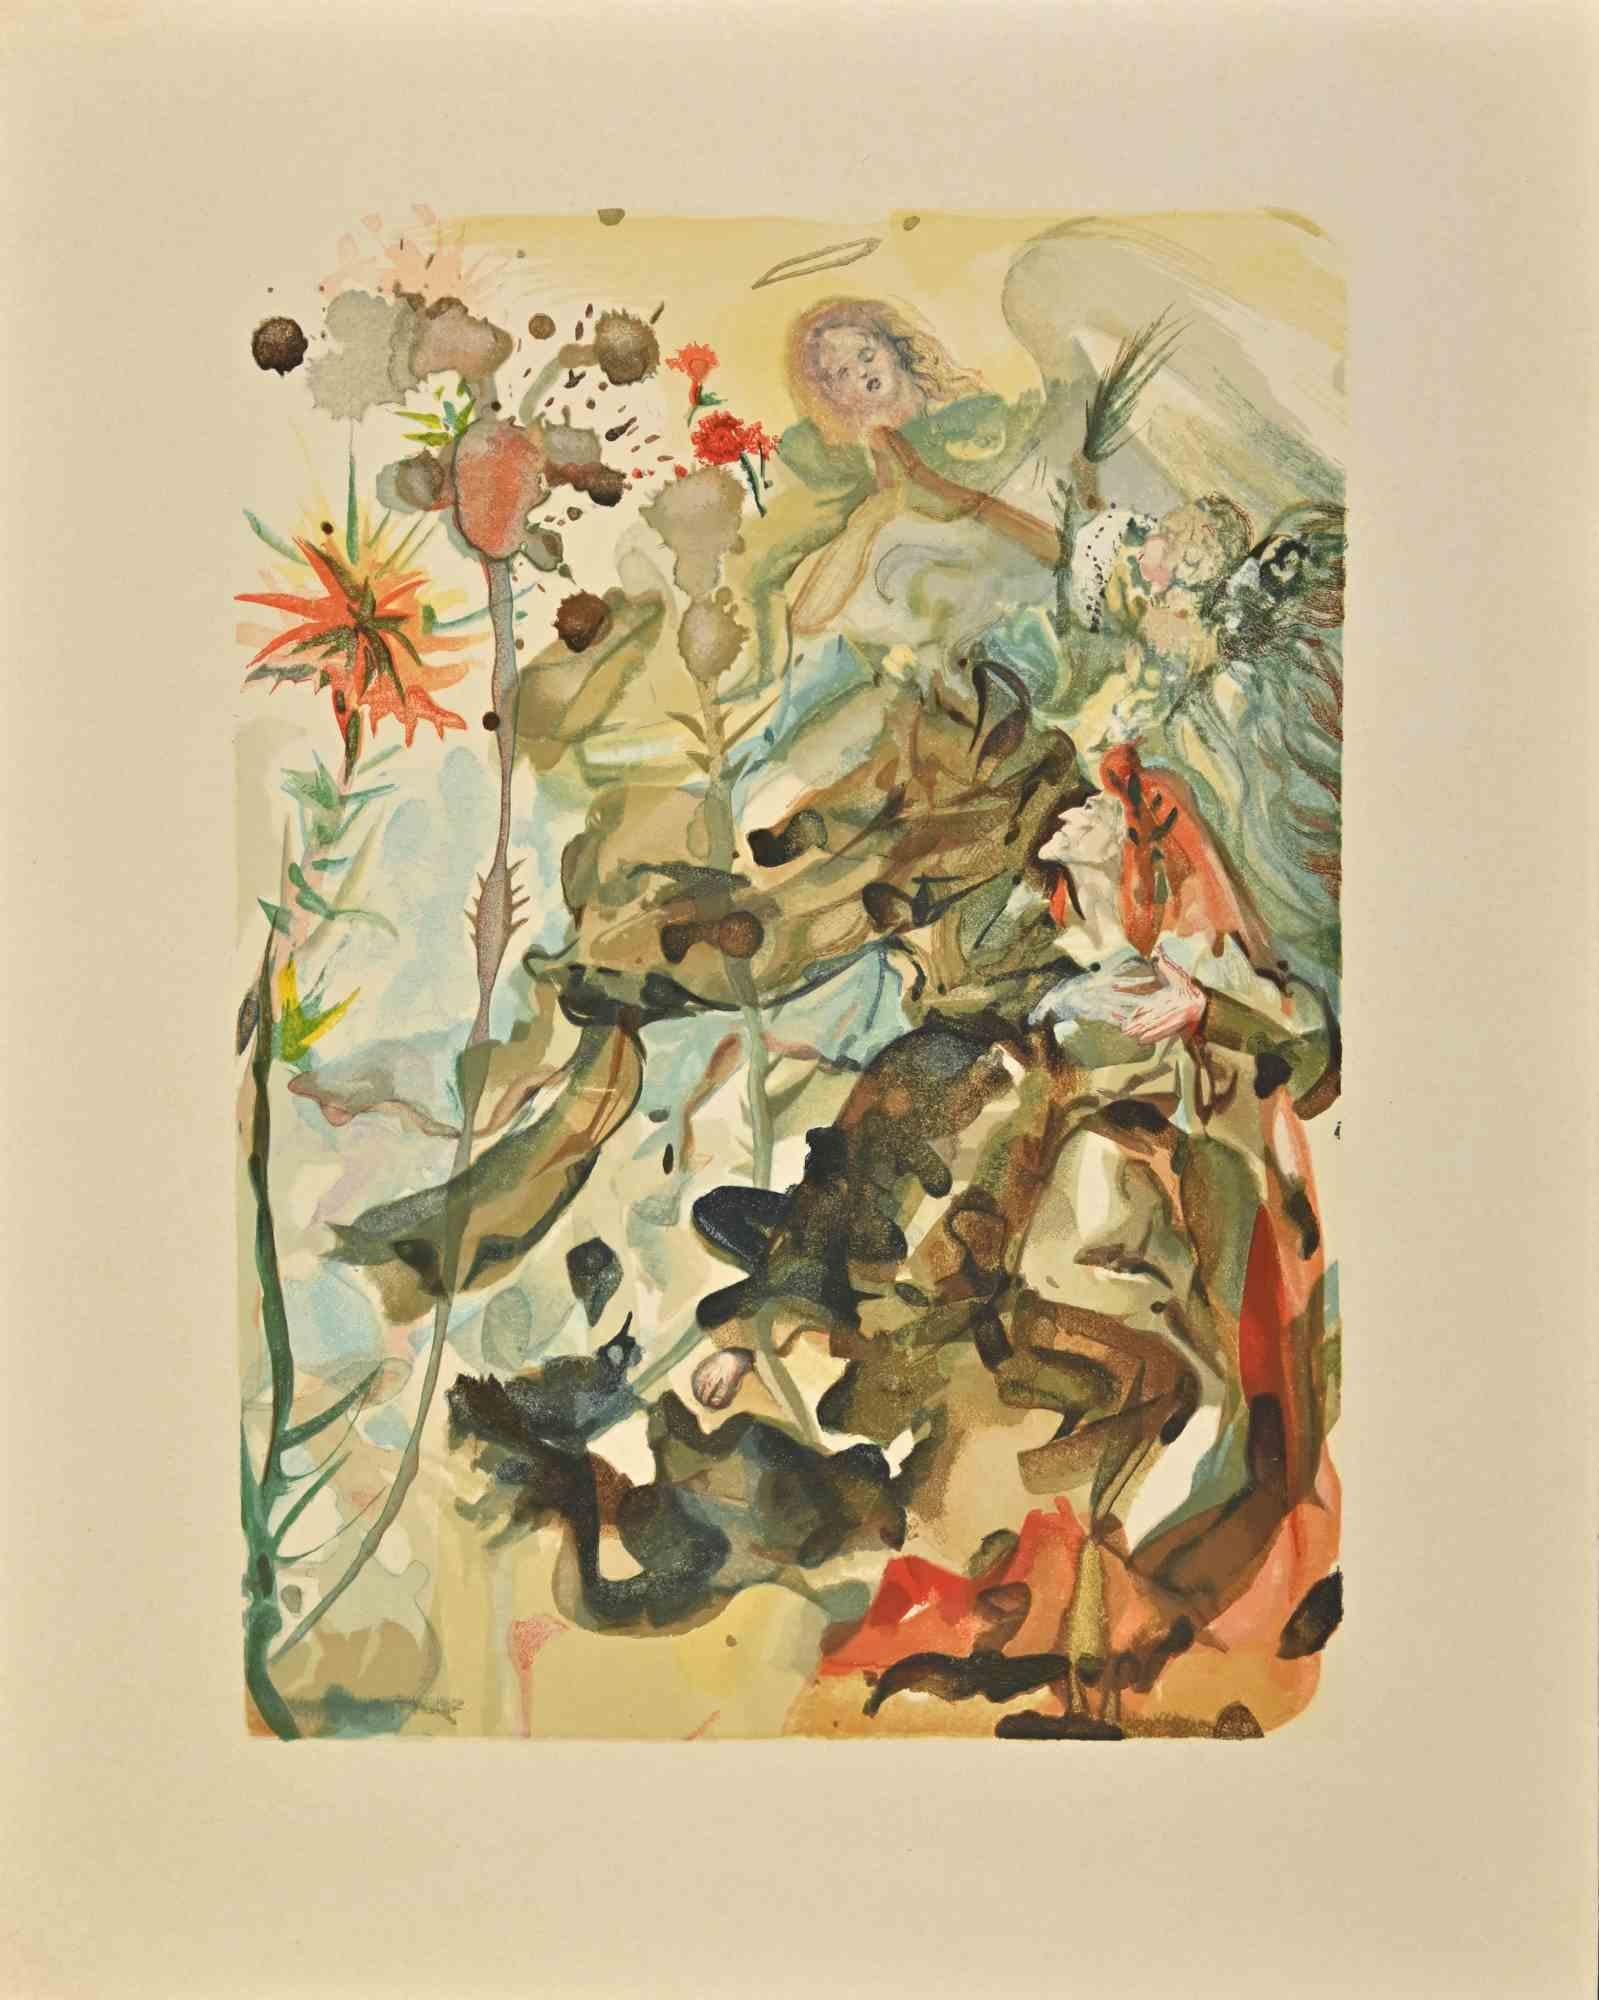 The Apparition of St. James „The Divine Comedy“ – Holzschnitt nach S. Dali – 1963